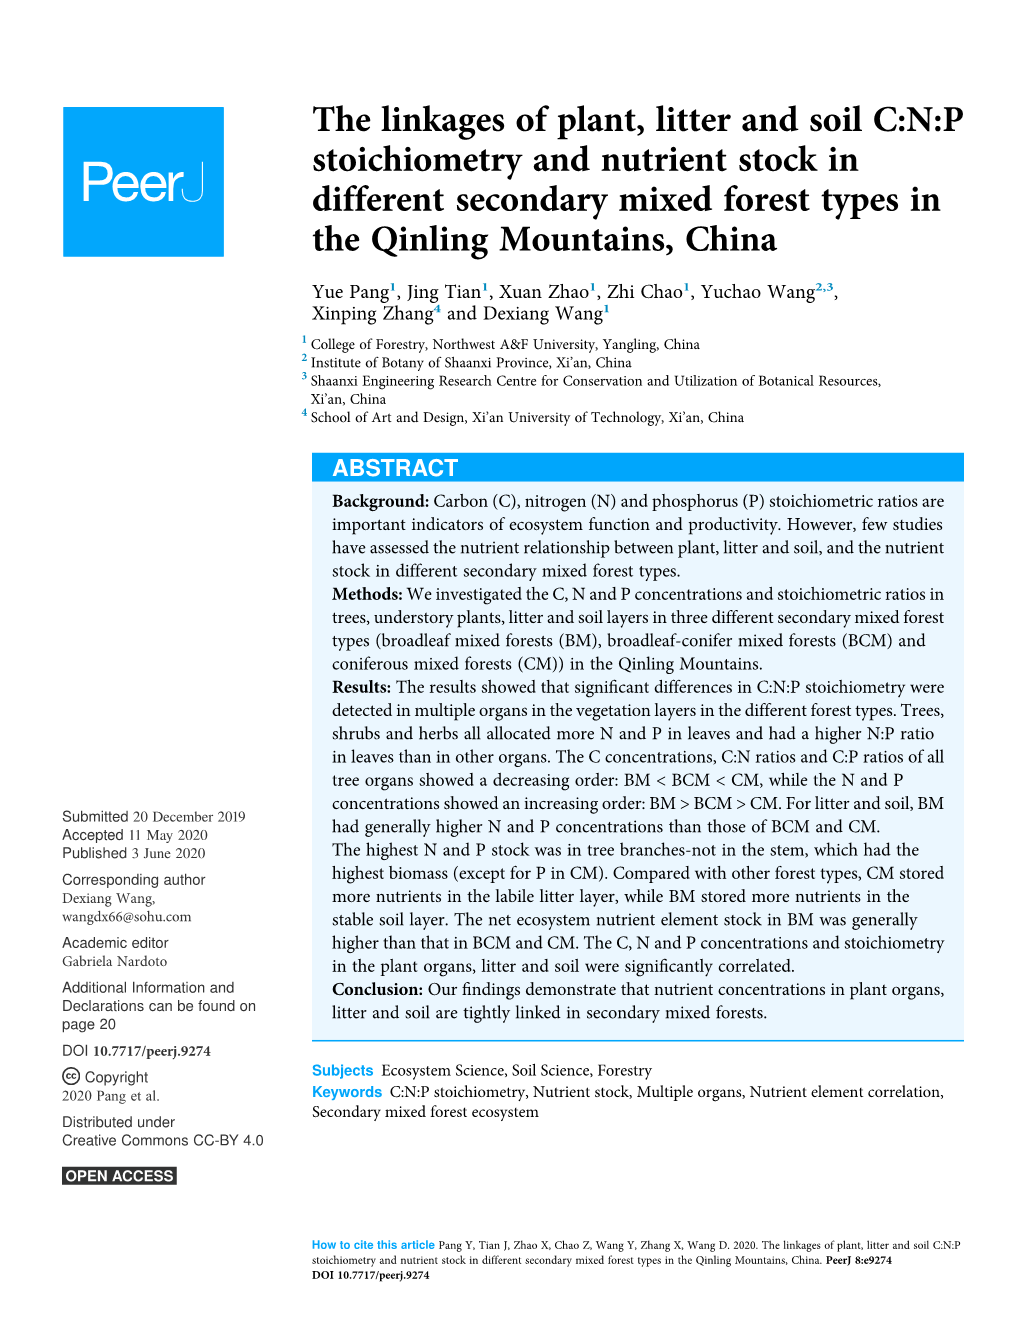 The Linkages of Plant, Litter and Soil C:N:P Stoichiometry and Nutrient Stock in Different Secondary Mixed Forest Types in the Qinling Mountains, China